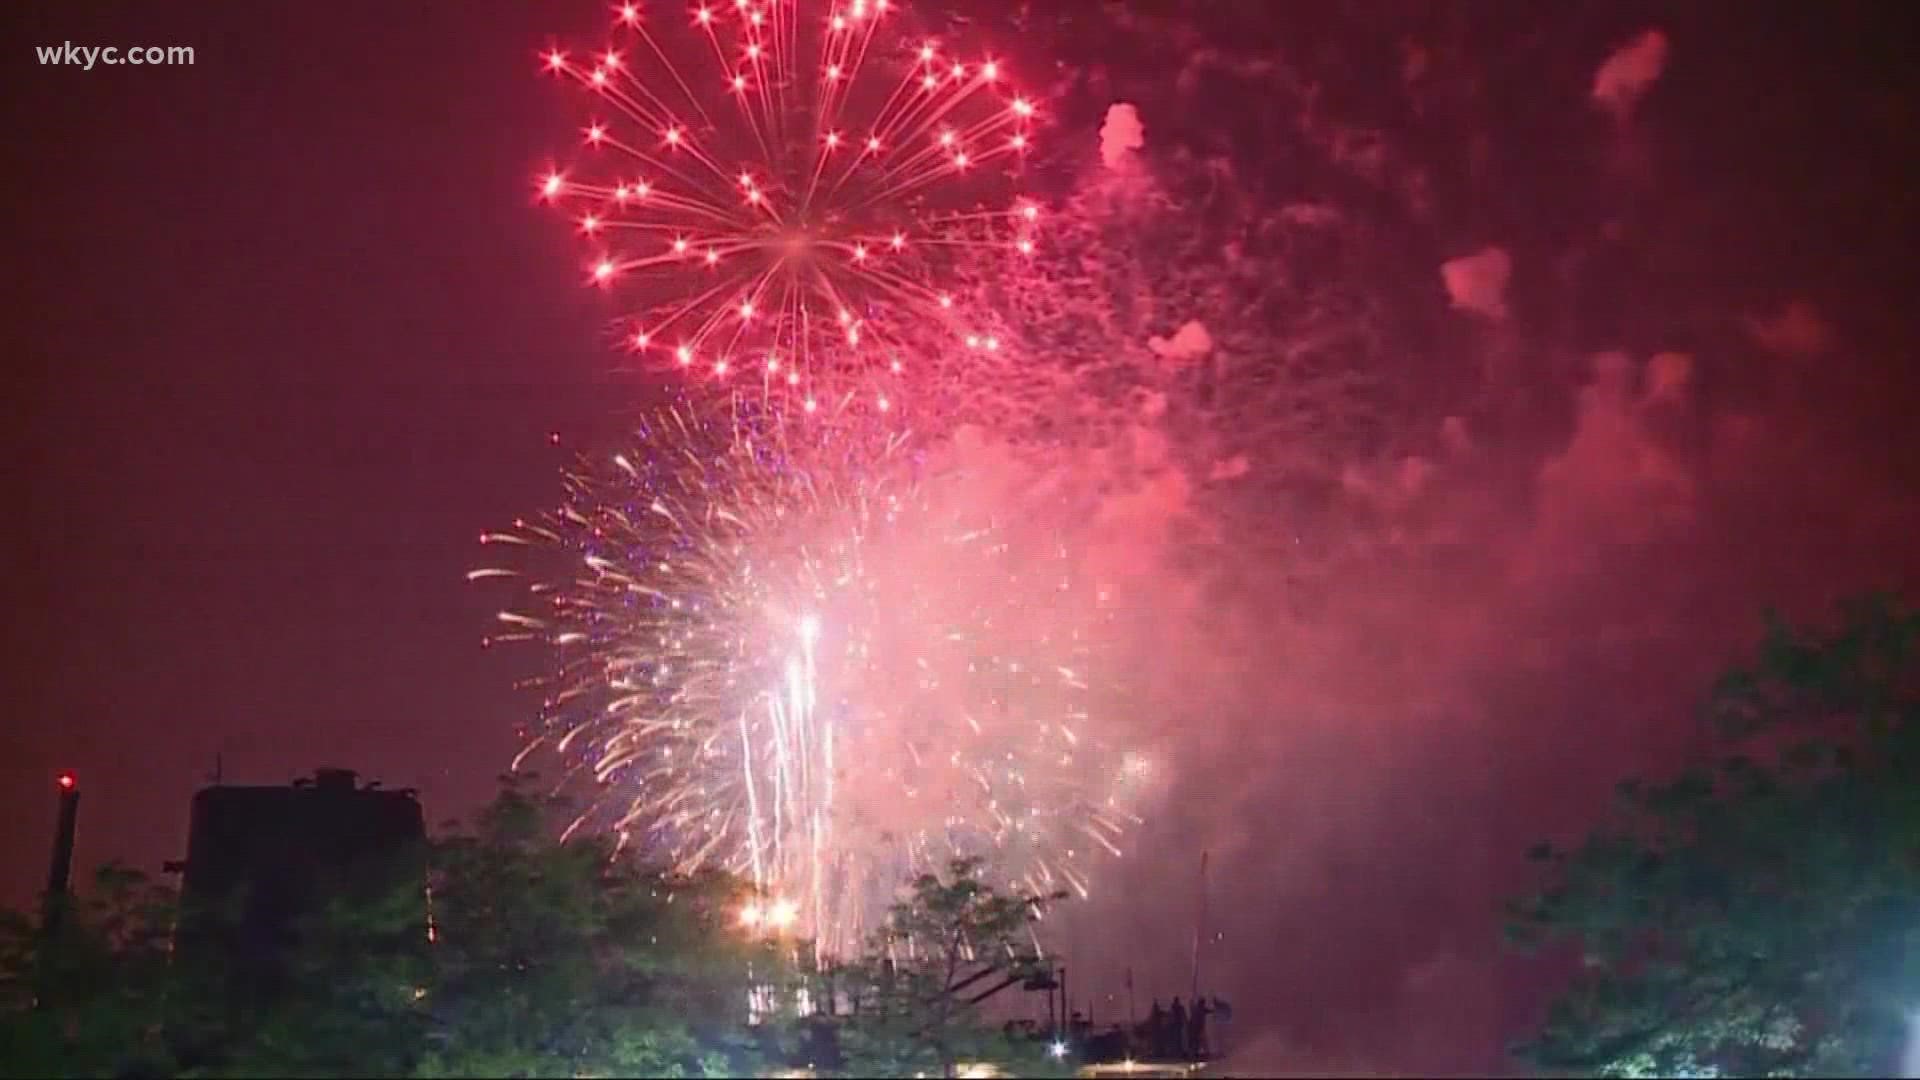 Ohio Governor Mike DeWine is expected to sign a bill allowing Ohio residents to legally purchase fireworks for personal use. Will Ujek reports.